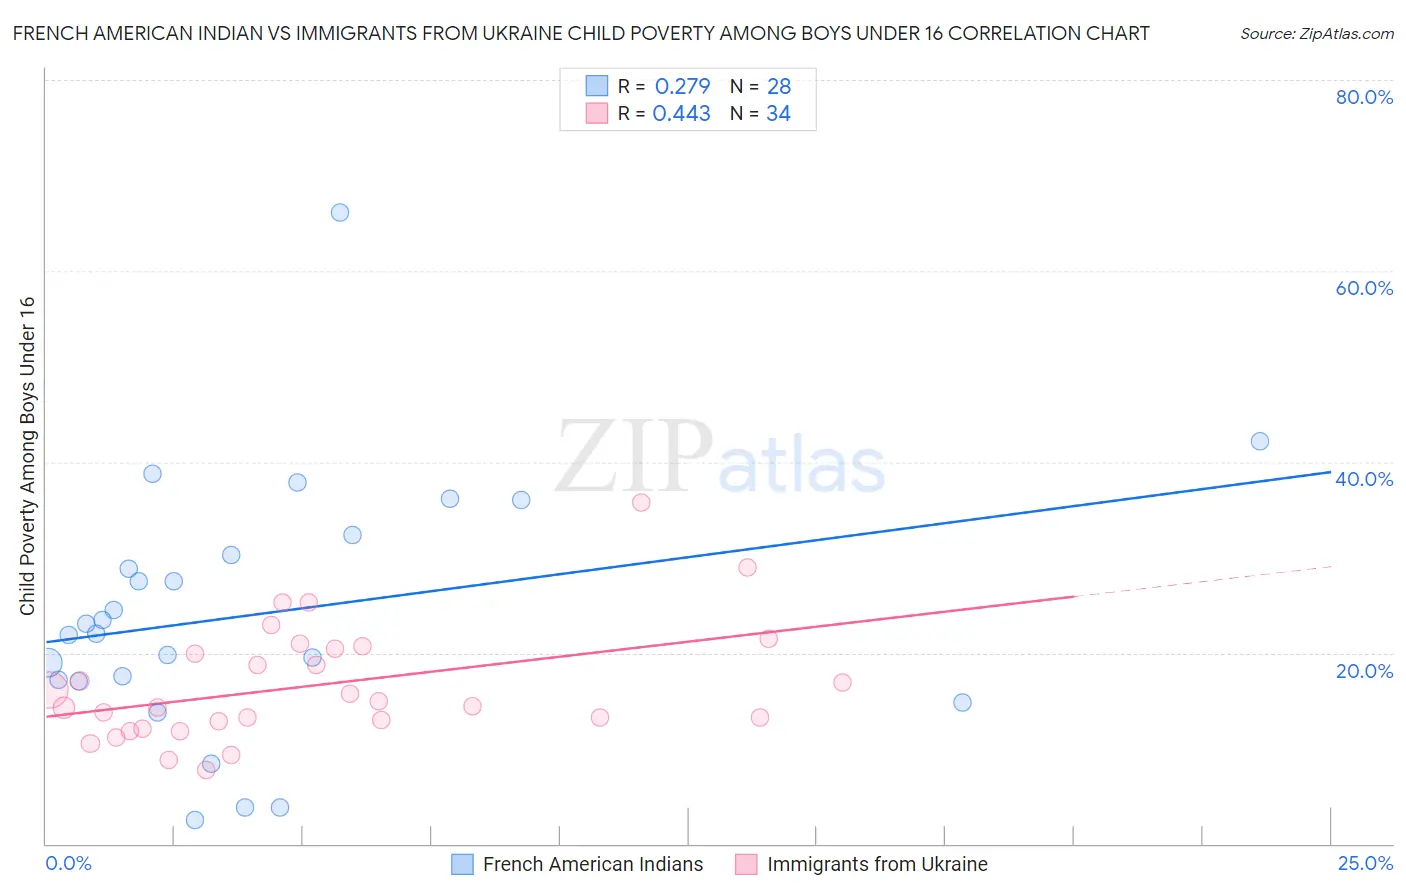 French American Indian vs Immigrants from Ukraine Child Poverty Among Boys Under 16